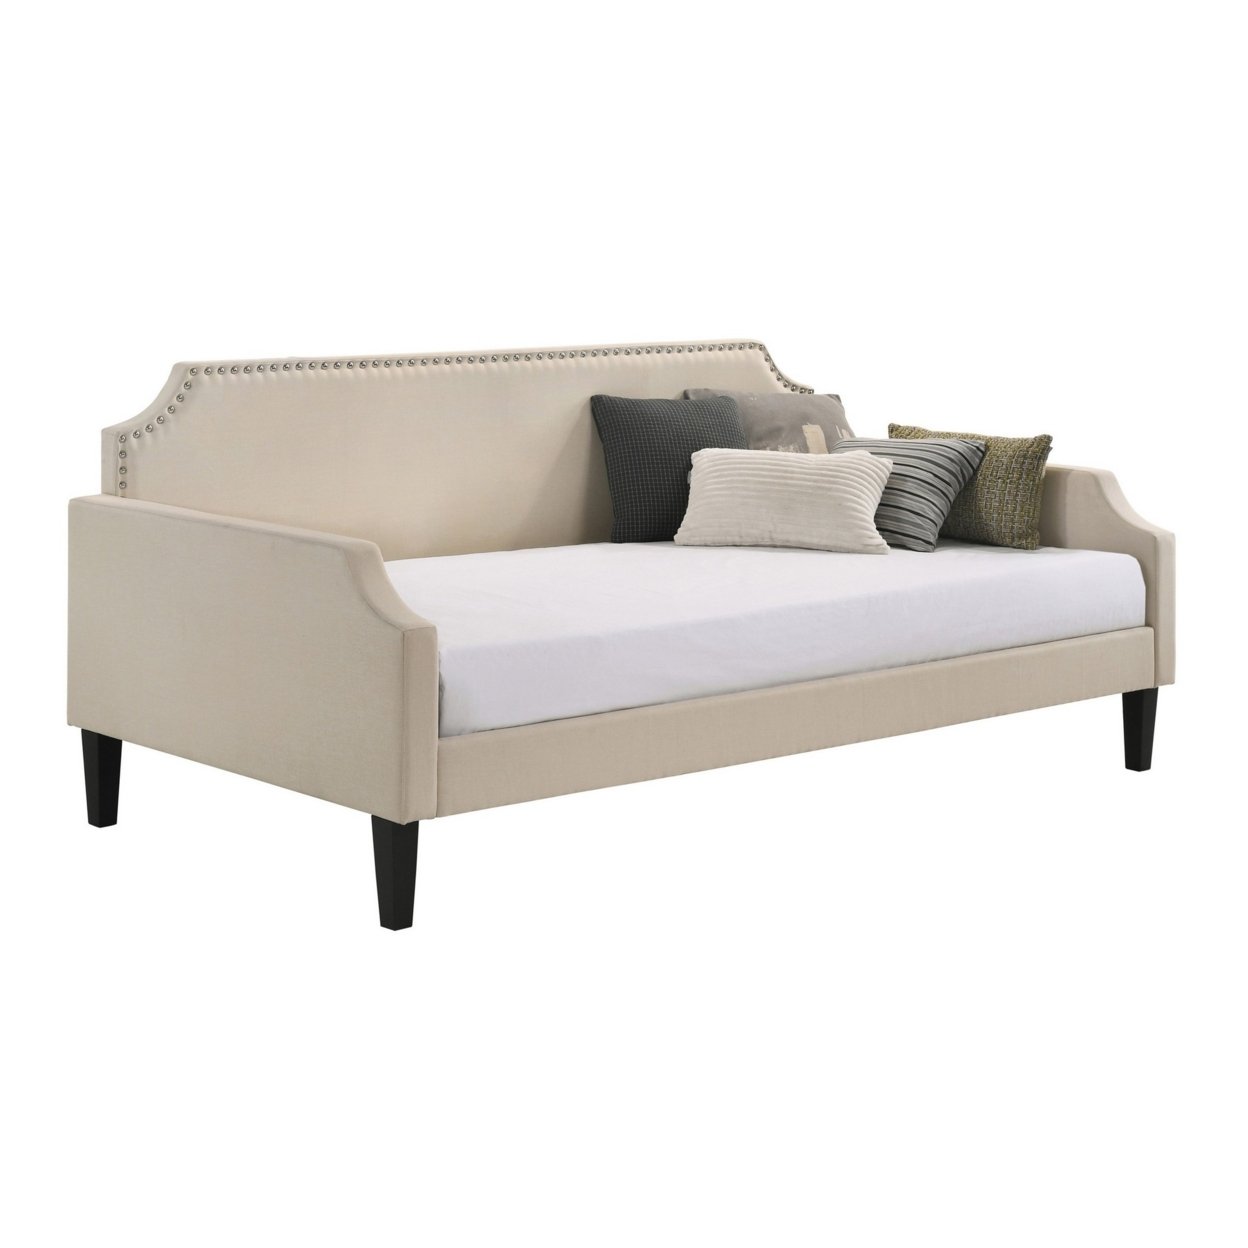 Pif Twin Daybed With Sleek Nailhead Trim, Taupe Brown Fabric Upholstery- Saltoro Sherpi